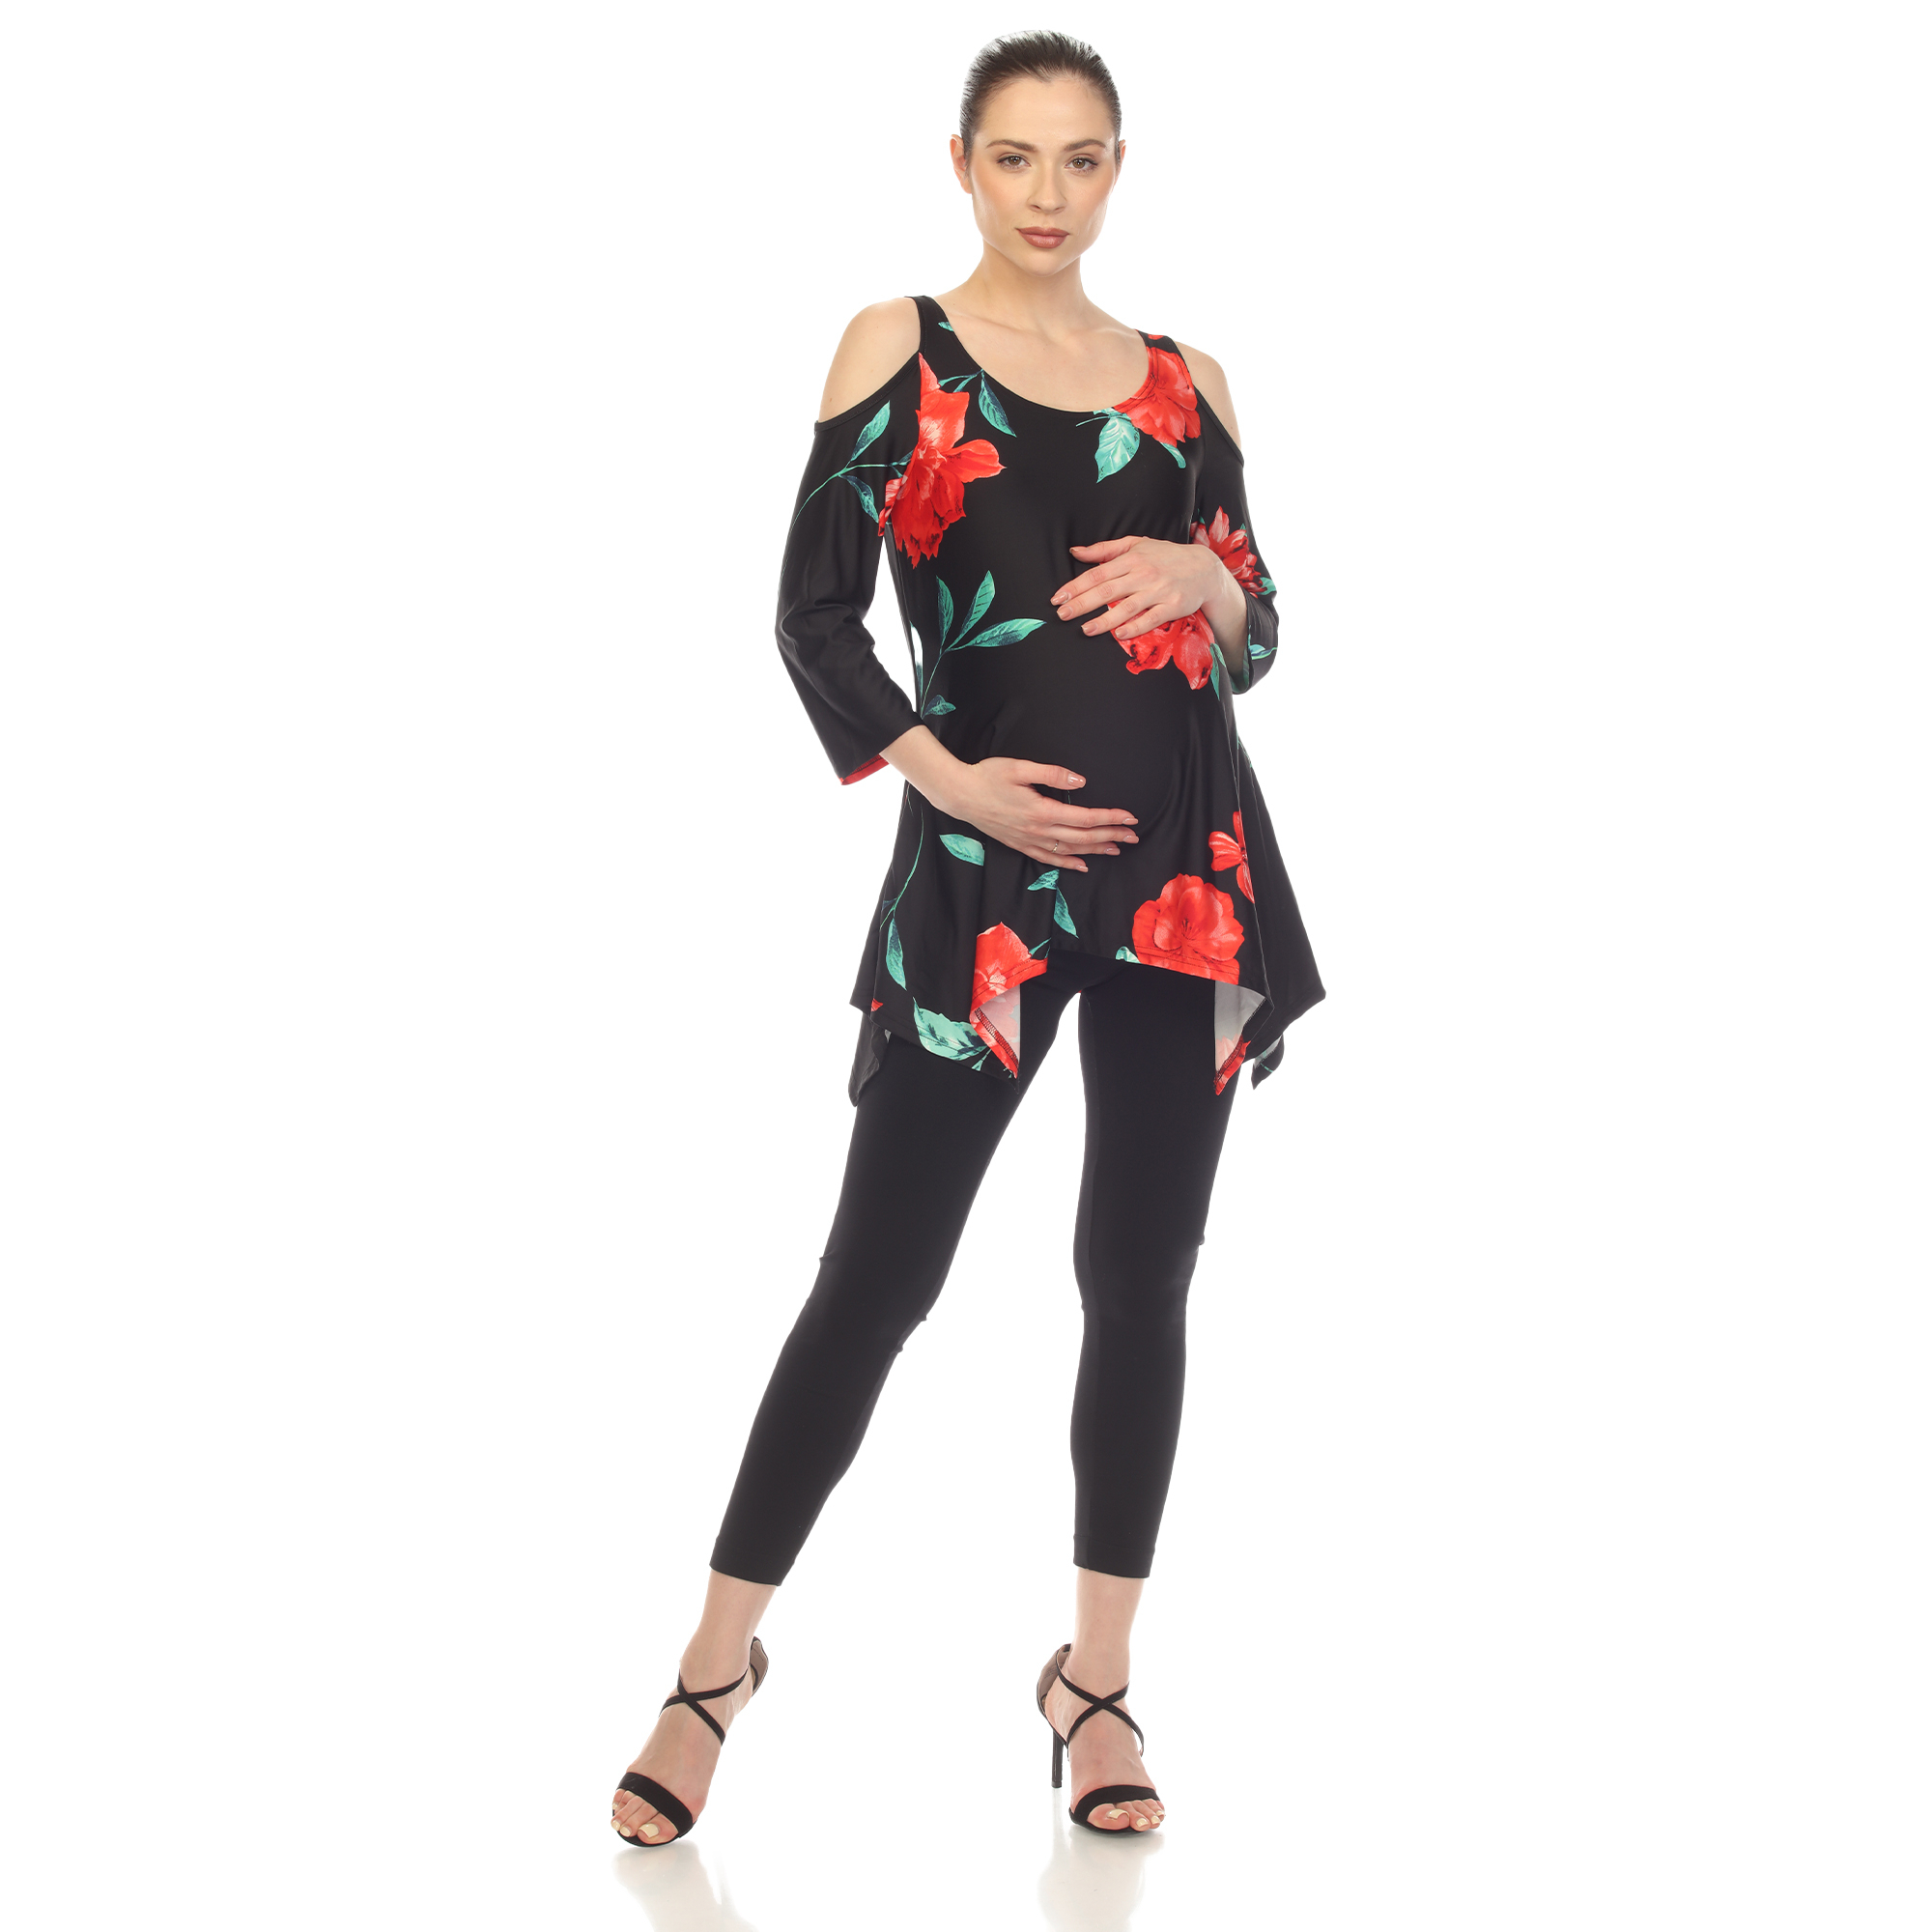 White Mark Women's Maternity Floral Cold Shoulder Tunic Top - Black/Red, Large